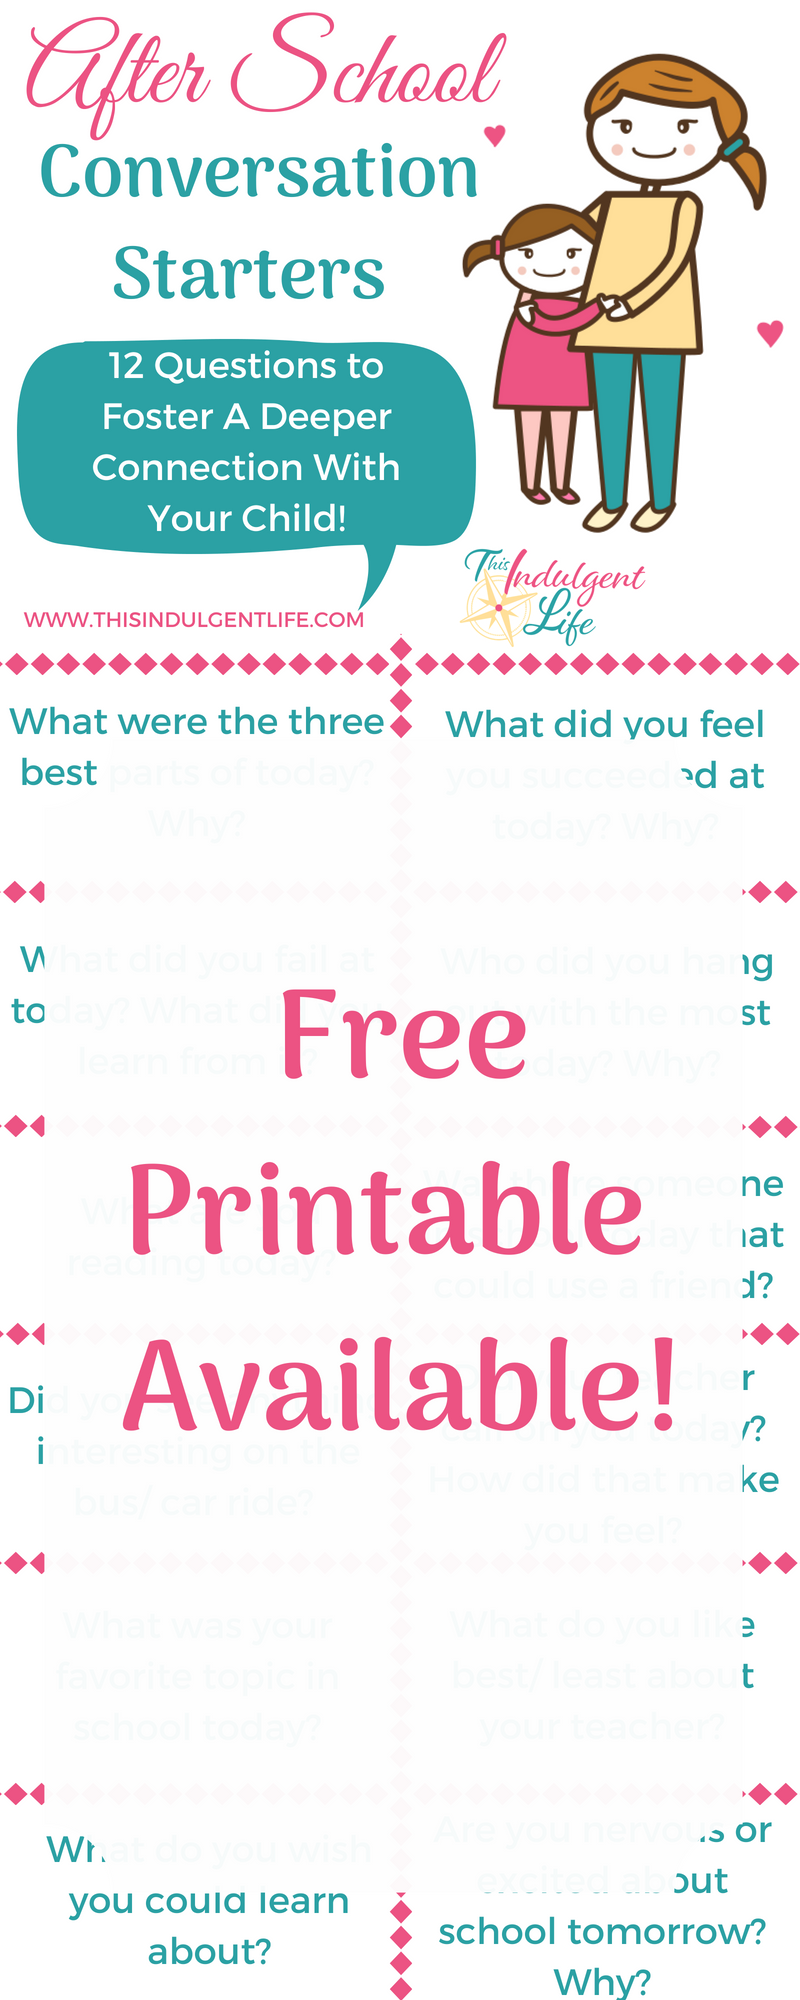 After School Conversation Starters Free Printable | This Indulgent Life | Use these 12 questions to start conversations with your child and develop a deeper bond with just 15 minutes of conversation after school! | #afterschool #backtoschool #conversationstarters #freeprintable #momadvice #parentingadvice #gentleparenting #respectfulparenting #howtobondwithmychild